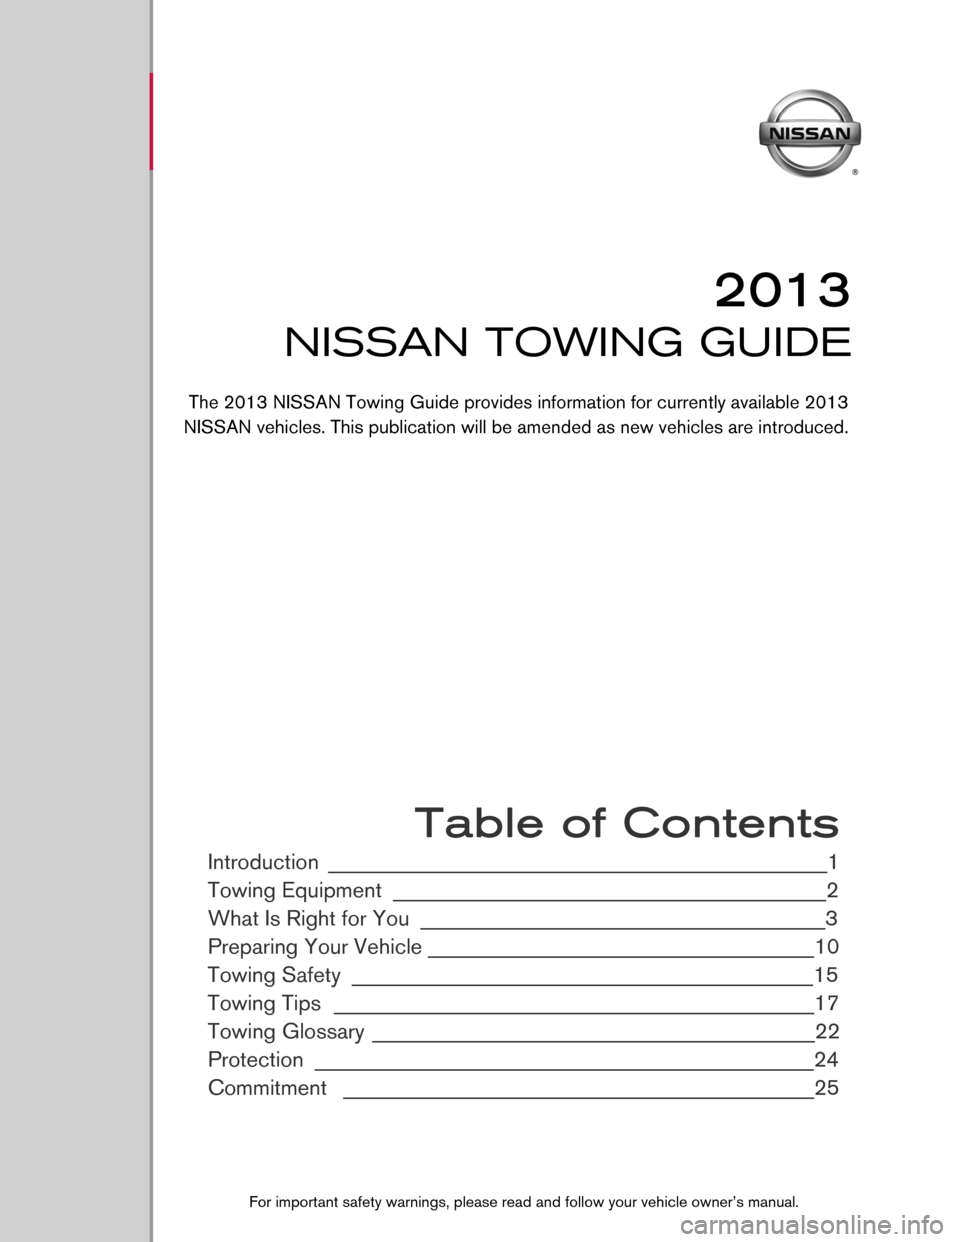 NISSAN 370Z ROADSTER 2013 Z34 Towing Guide 9
2013
NISSAN TOWING GUIDE
 Table of Contents
Introduction _____________________________________________________1 
Towing Equipment
 ______________________________________________2 
What Is Right for 